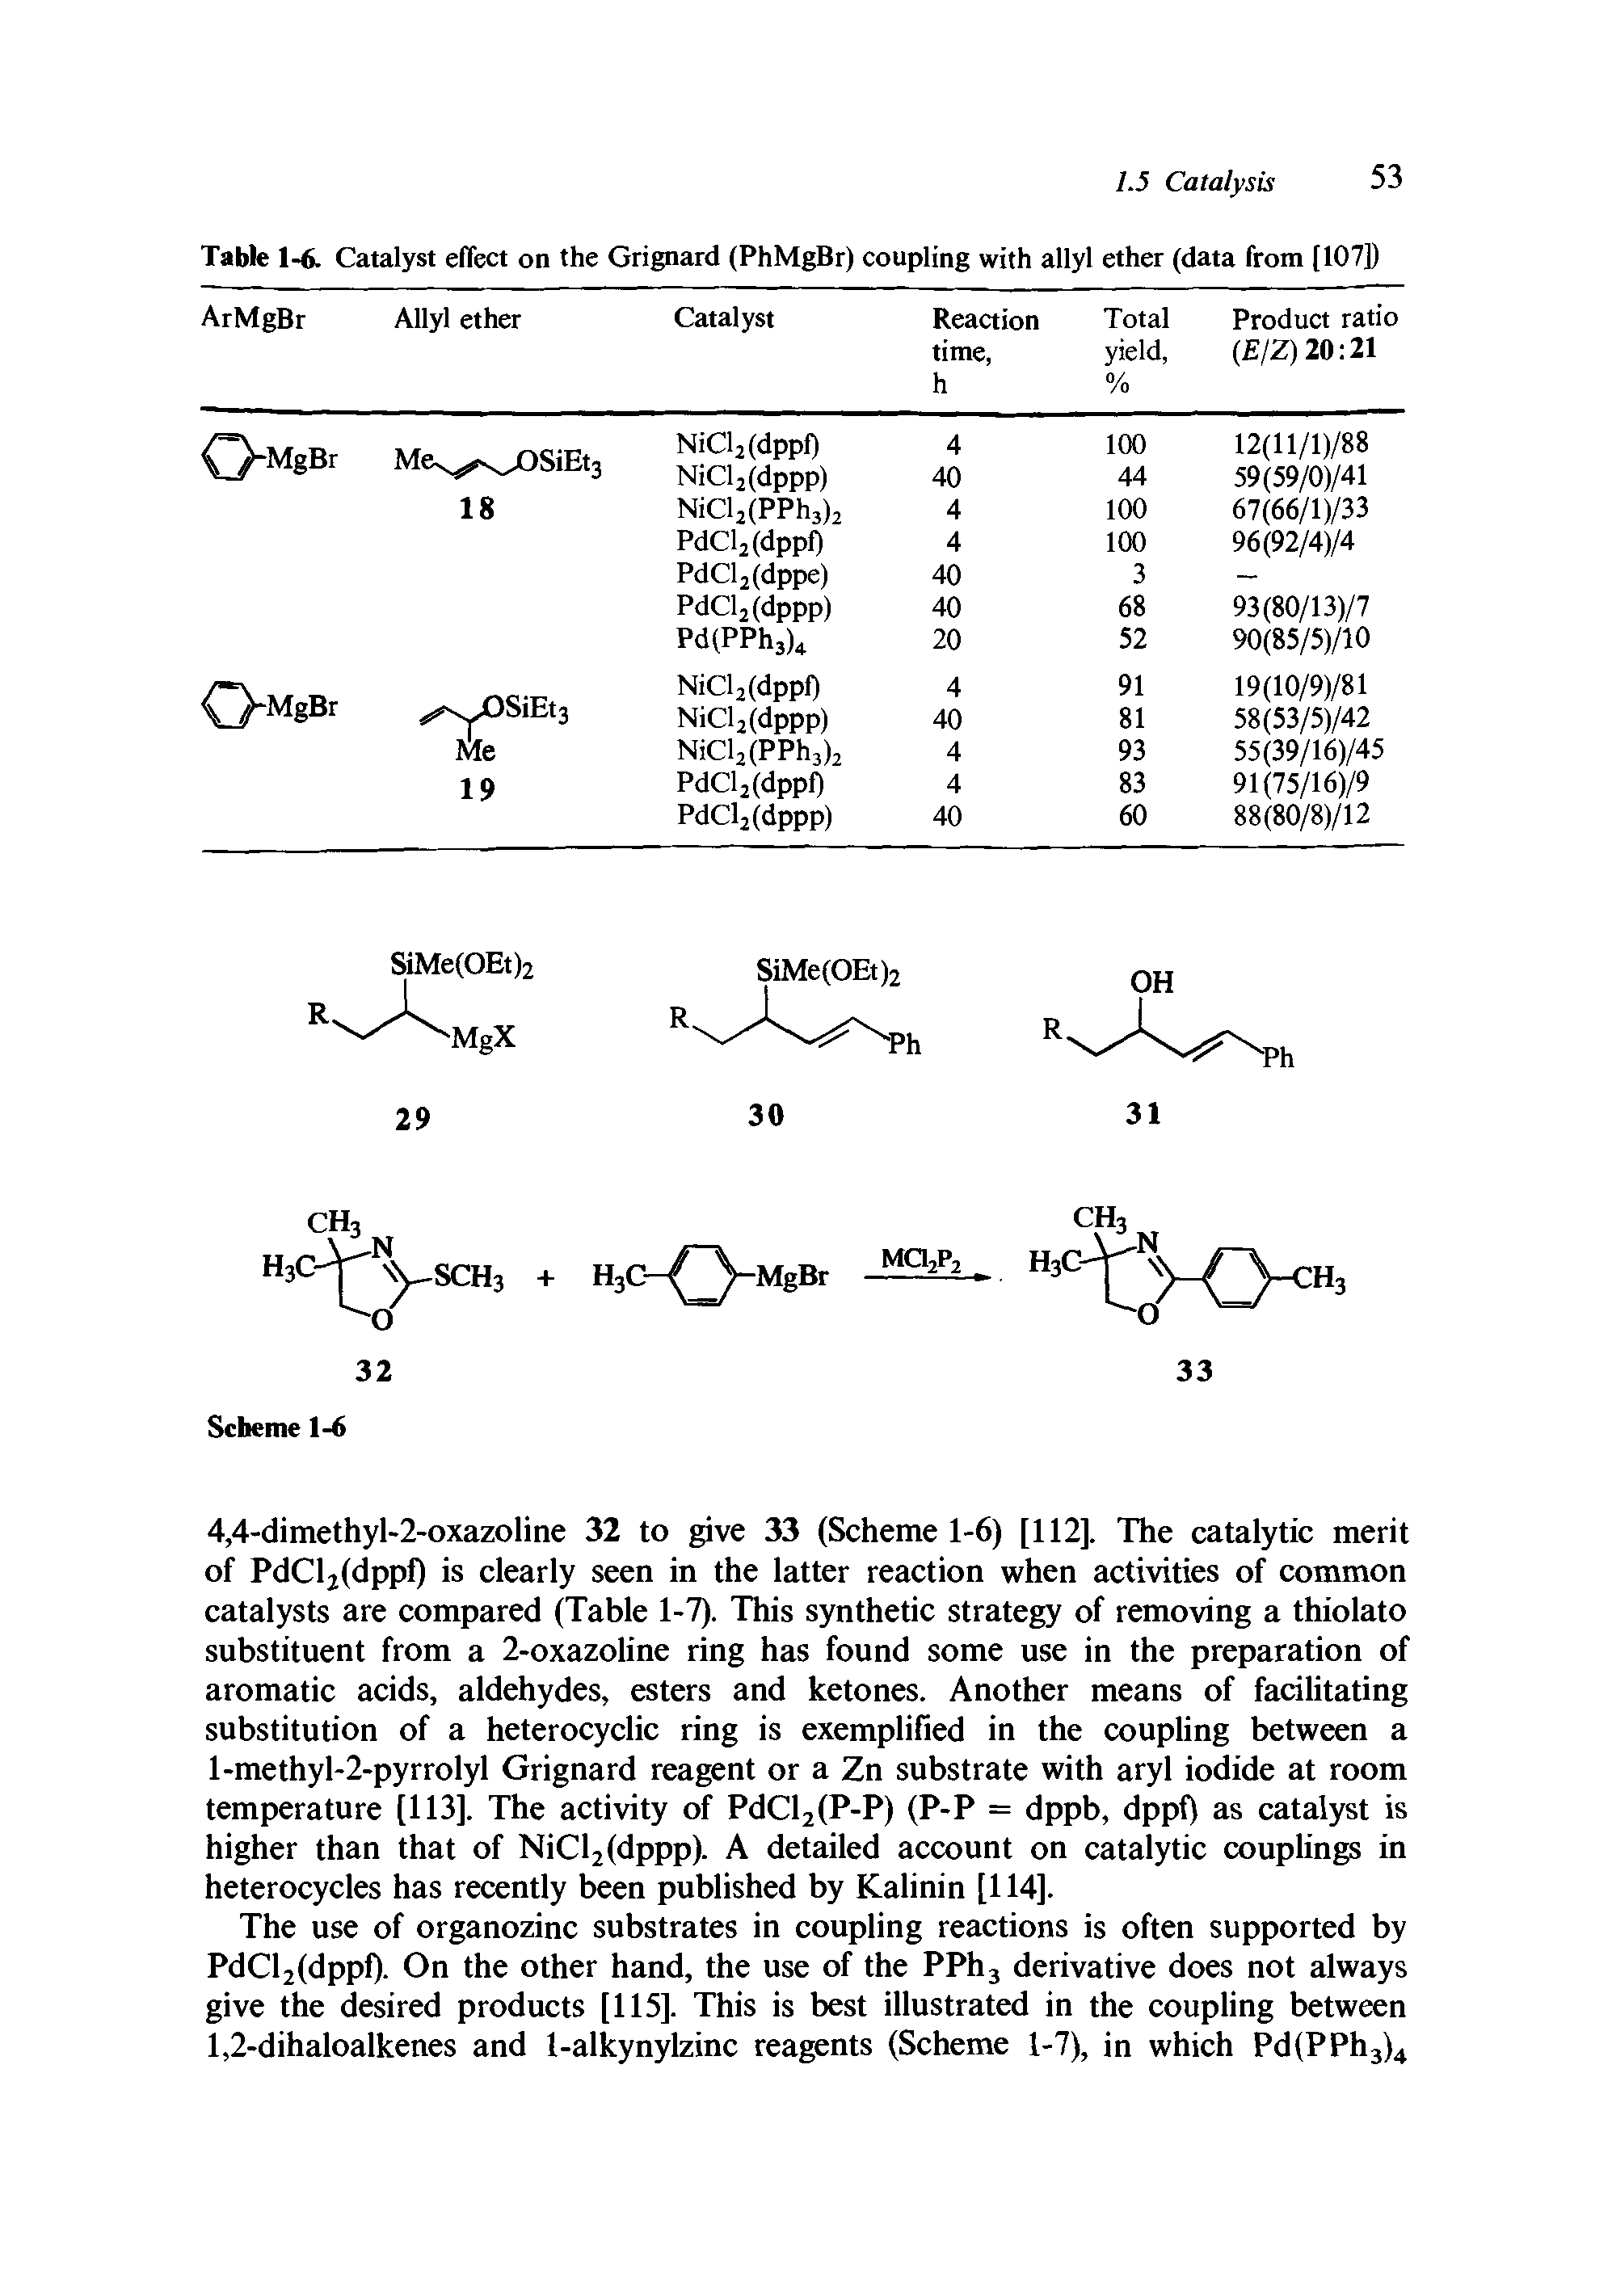 Table 1-6. Catalyst effect on the Grignard (PhMgBr) coupling with allyl ether (data from [107])...